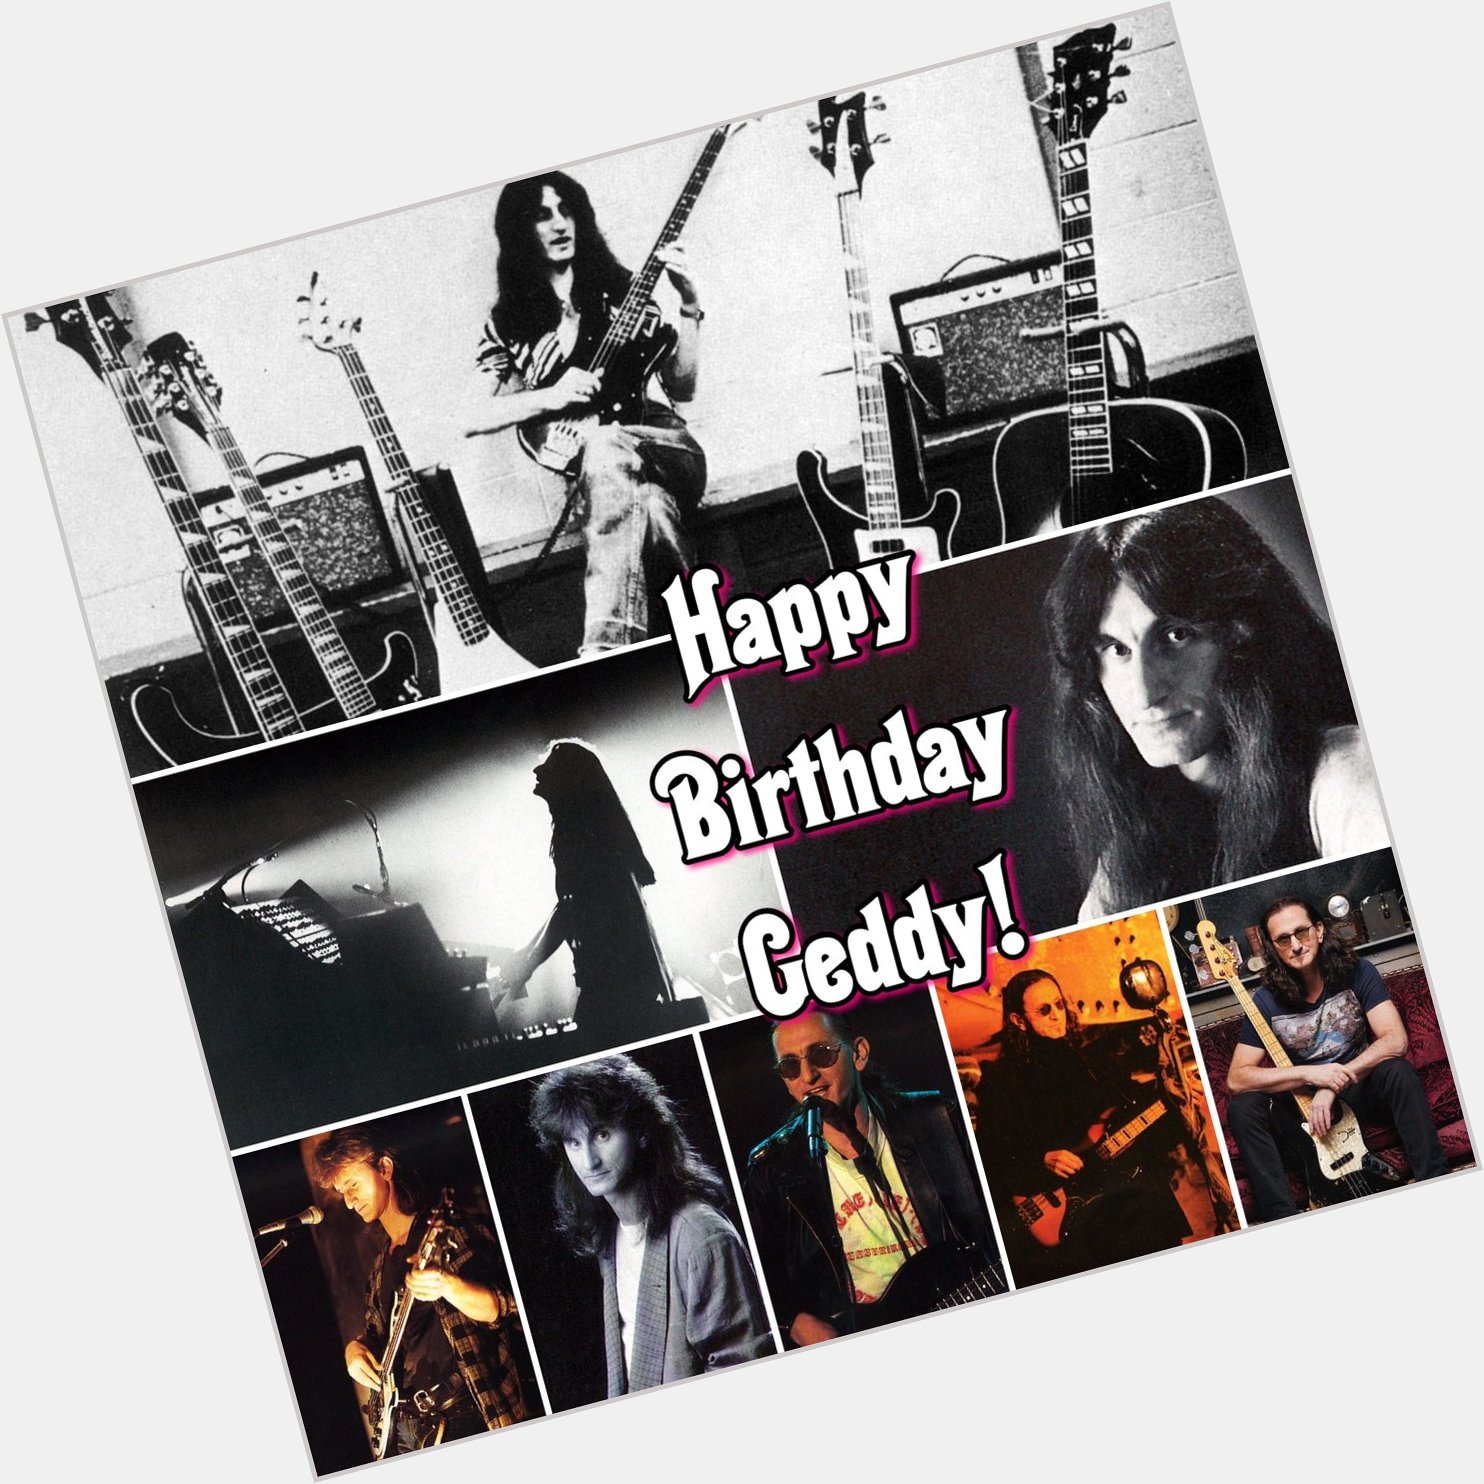 Happy Birthday to the one and only Geddy Lee! 